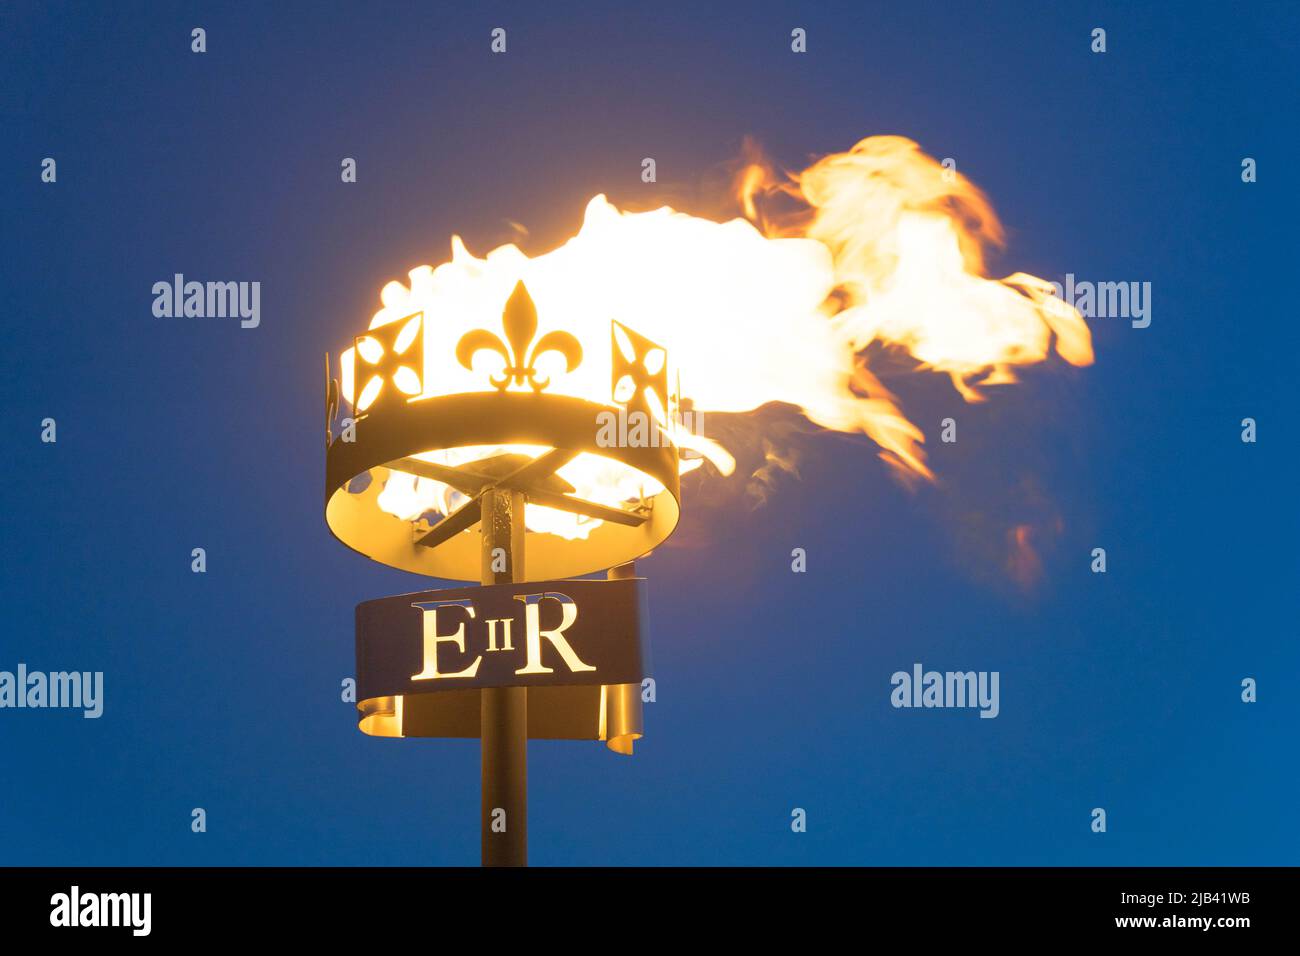 London UK, 2nd June 2022. To celebrate Queen Elizabeth II’s Platinum Jubilee, marking her 70 years on the throne, people gathered at Blackheath common to light a Jubilee beacon, one of more than 3,500 flaming tributes across the UK and the Commonwealth. Credit: glosszoom/Alamy Live News Stock Photo